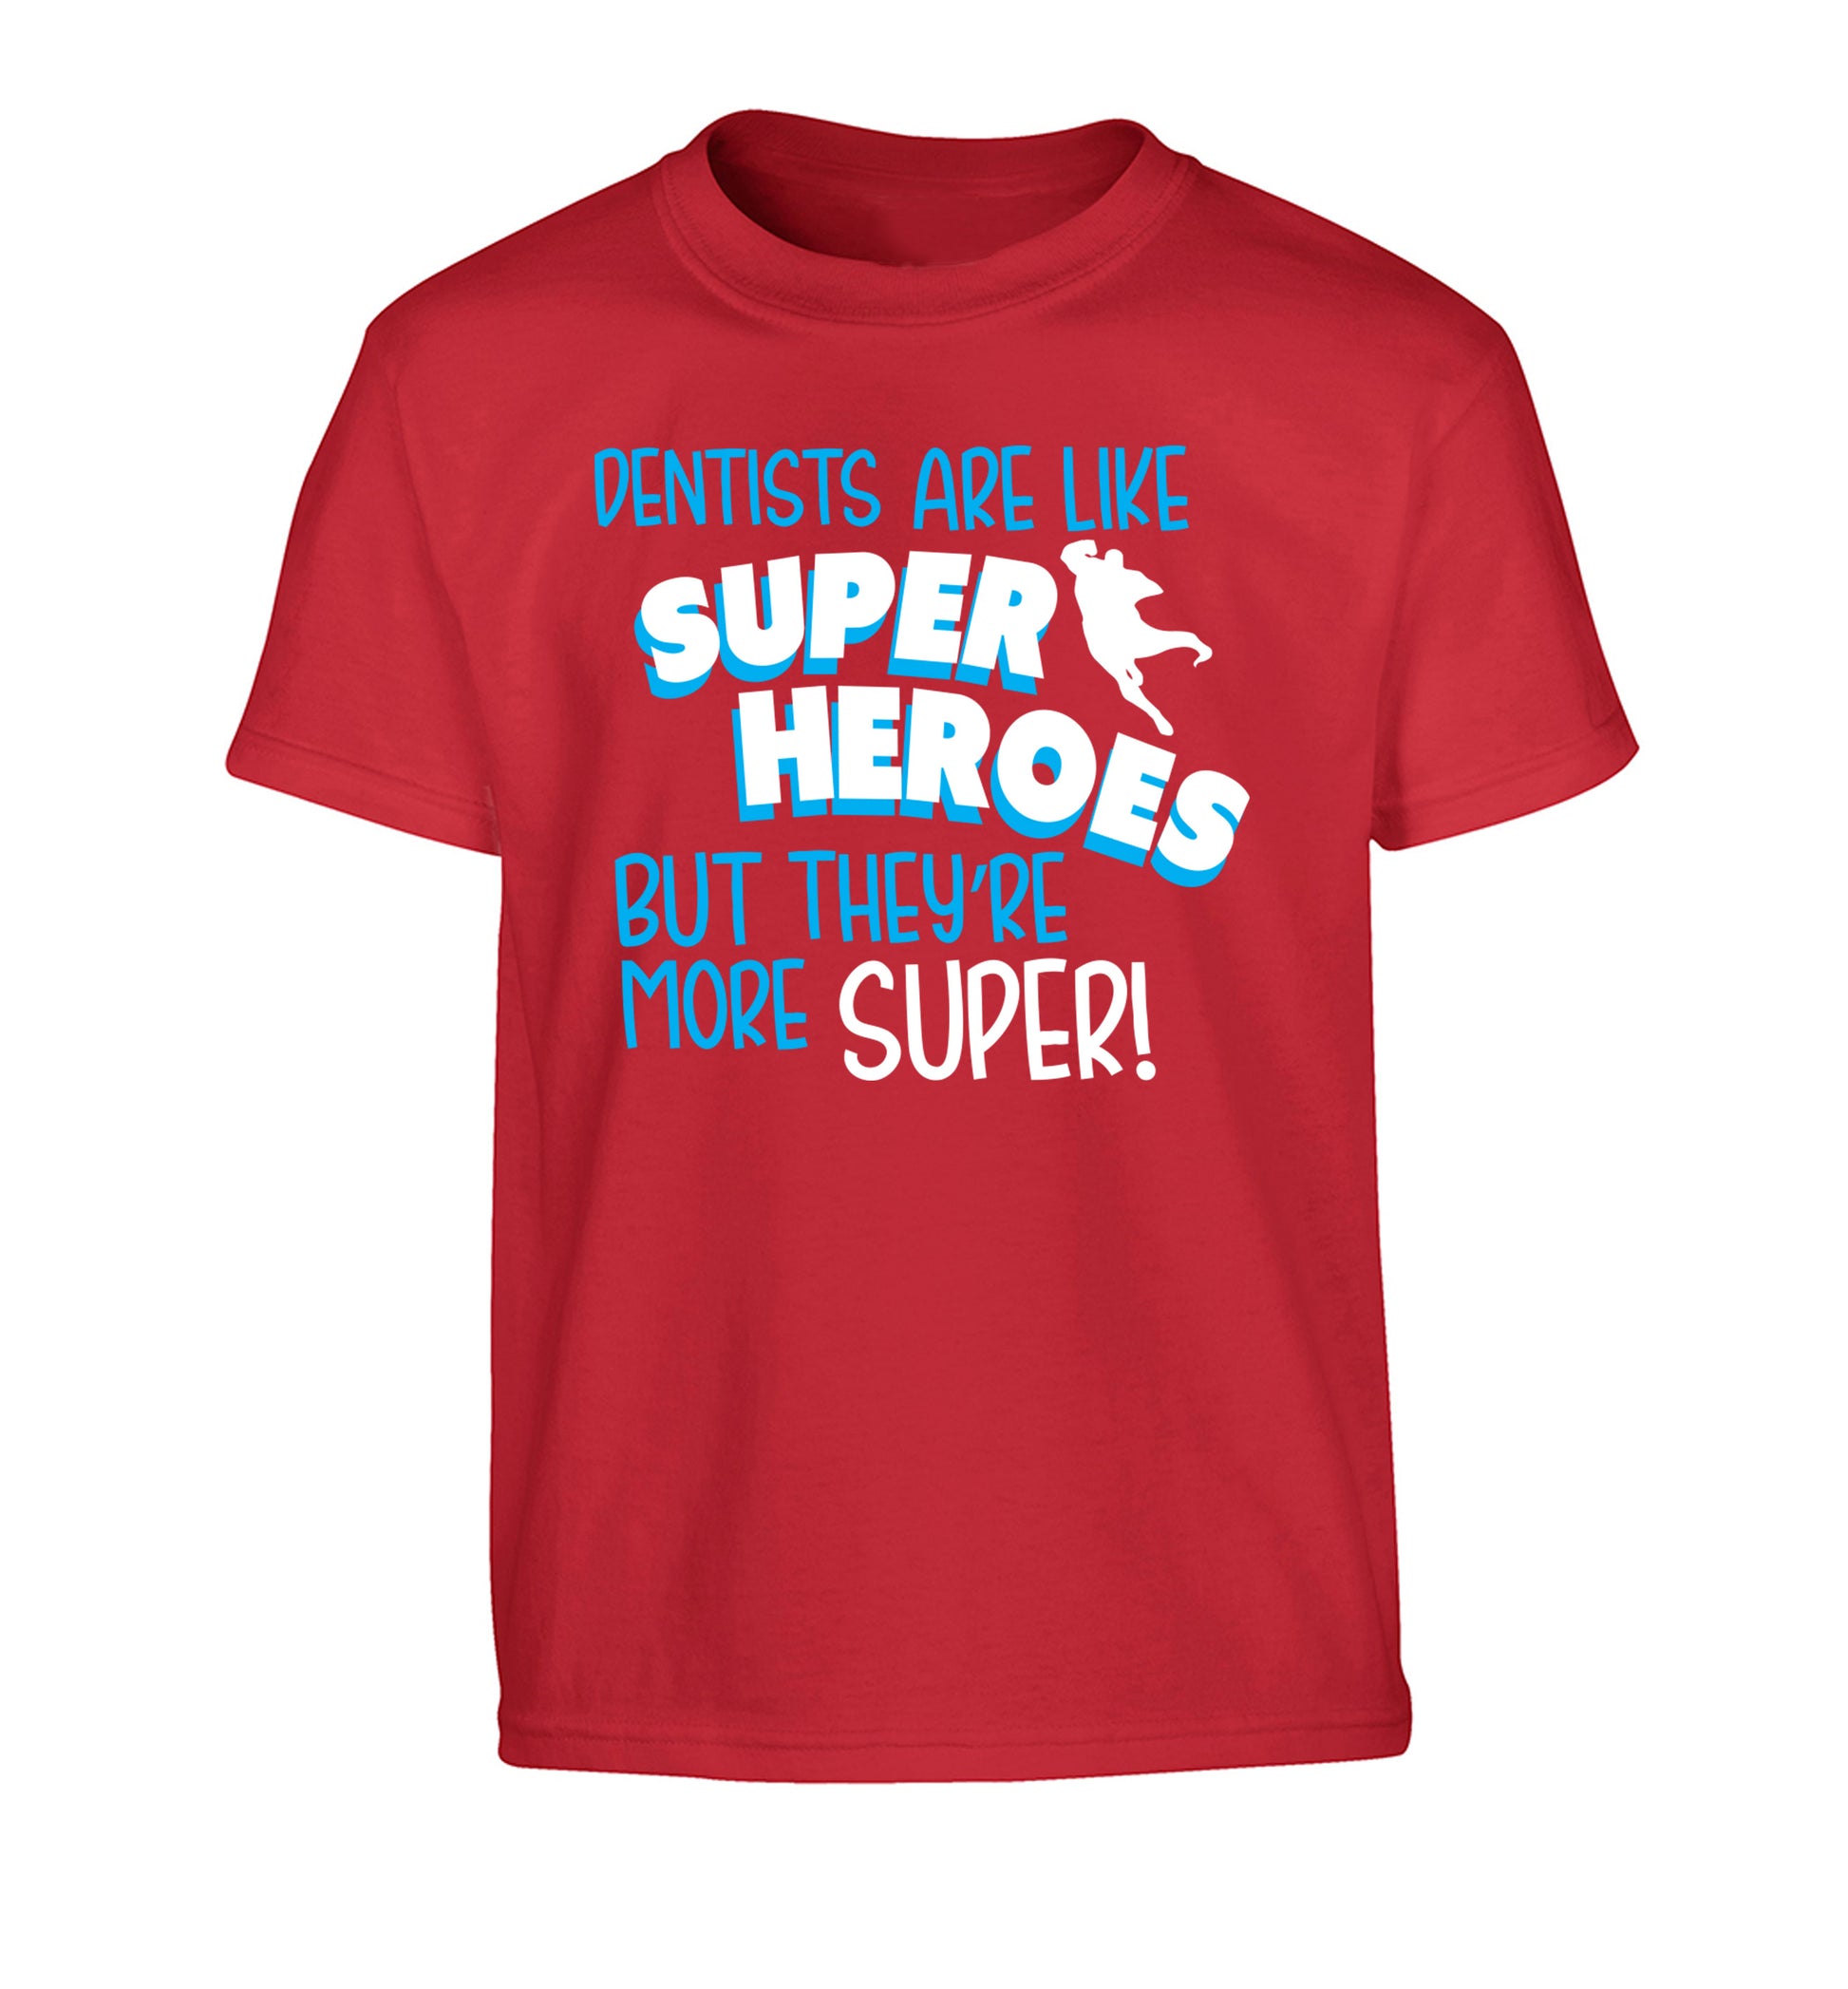 Dentists are like superheros but they're more super Children's red Tshirt 12-13 Years